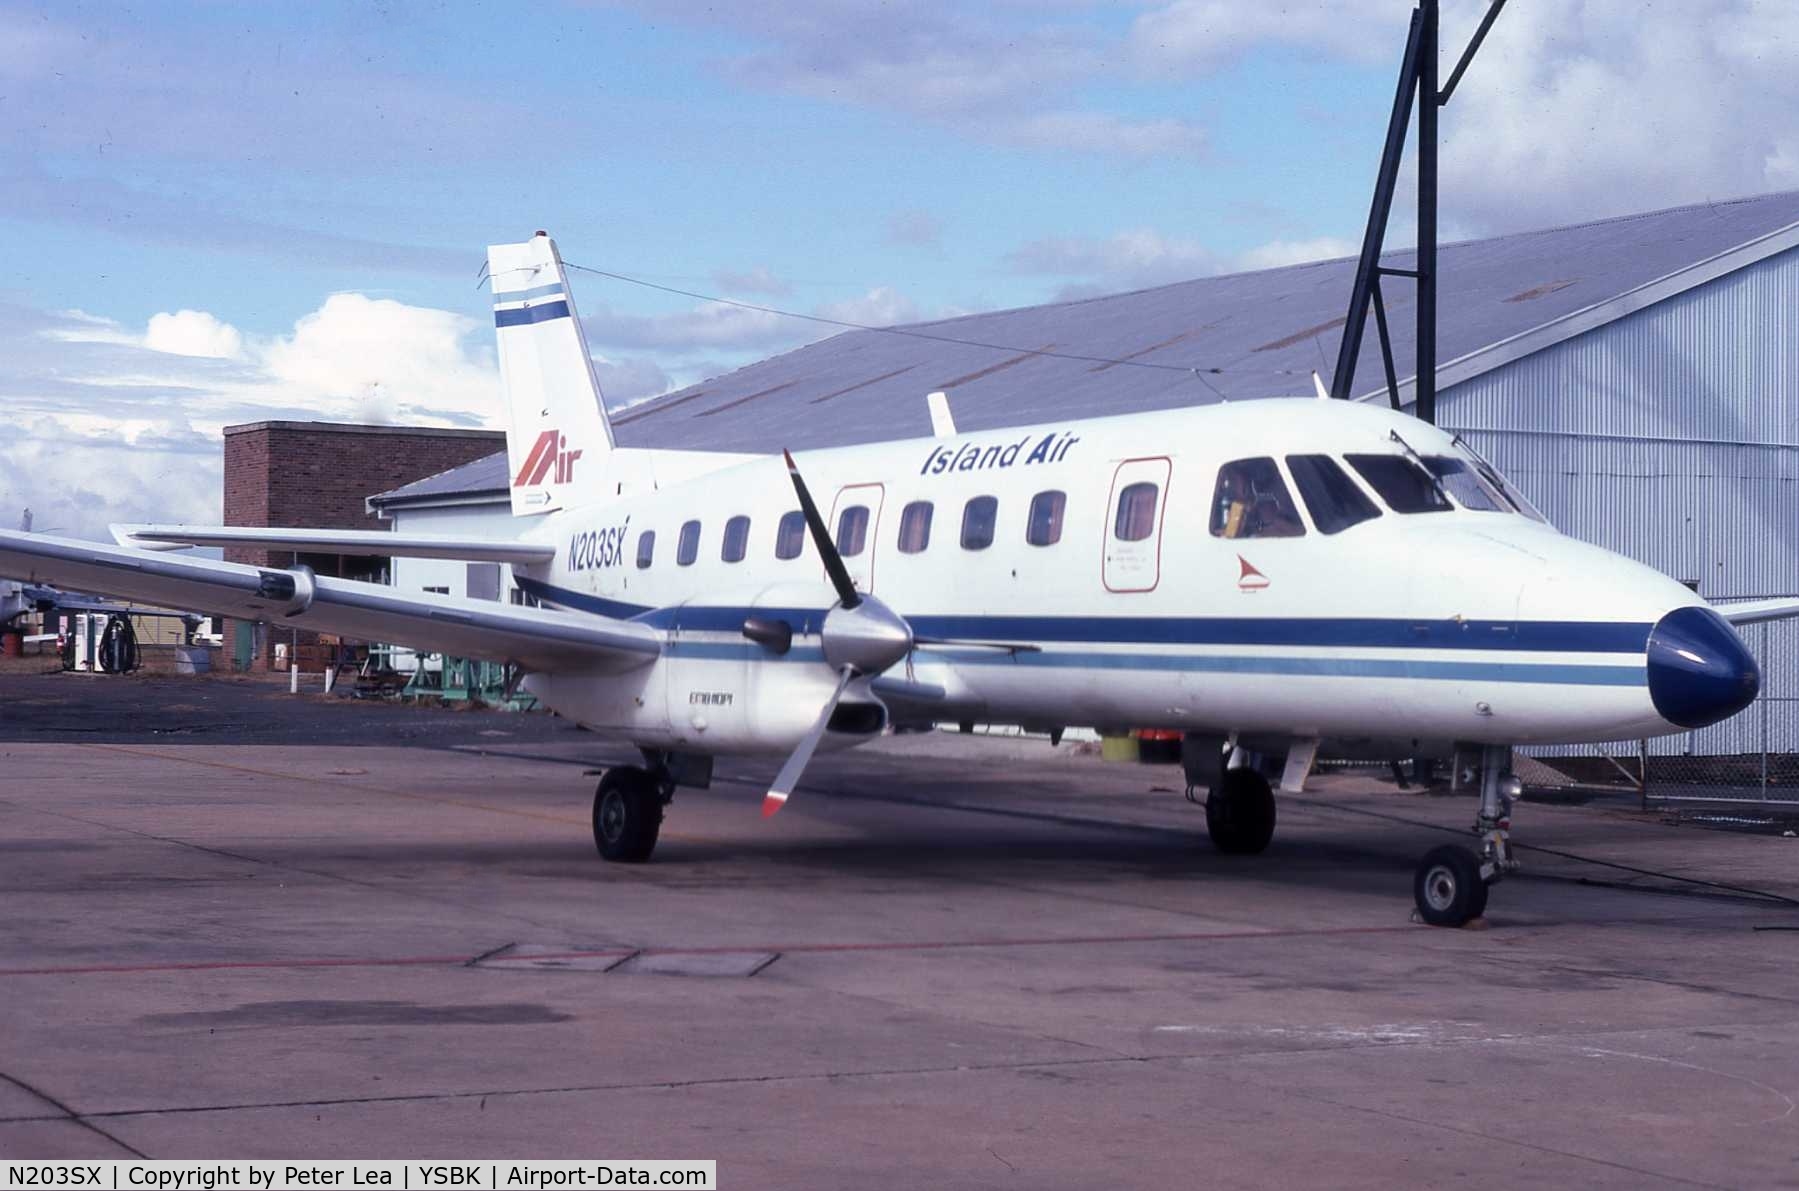 N203SX, 1979 Embraer EMB-110P1 Bandeirante C/N 110236, This aircraft was photographed at Bankstown in 1982 as ex IslandAir N203SX. It took up Australian rego VH-HVS and served with Eastern Australia Airlines